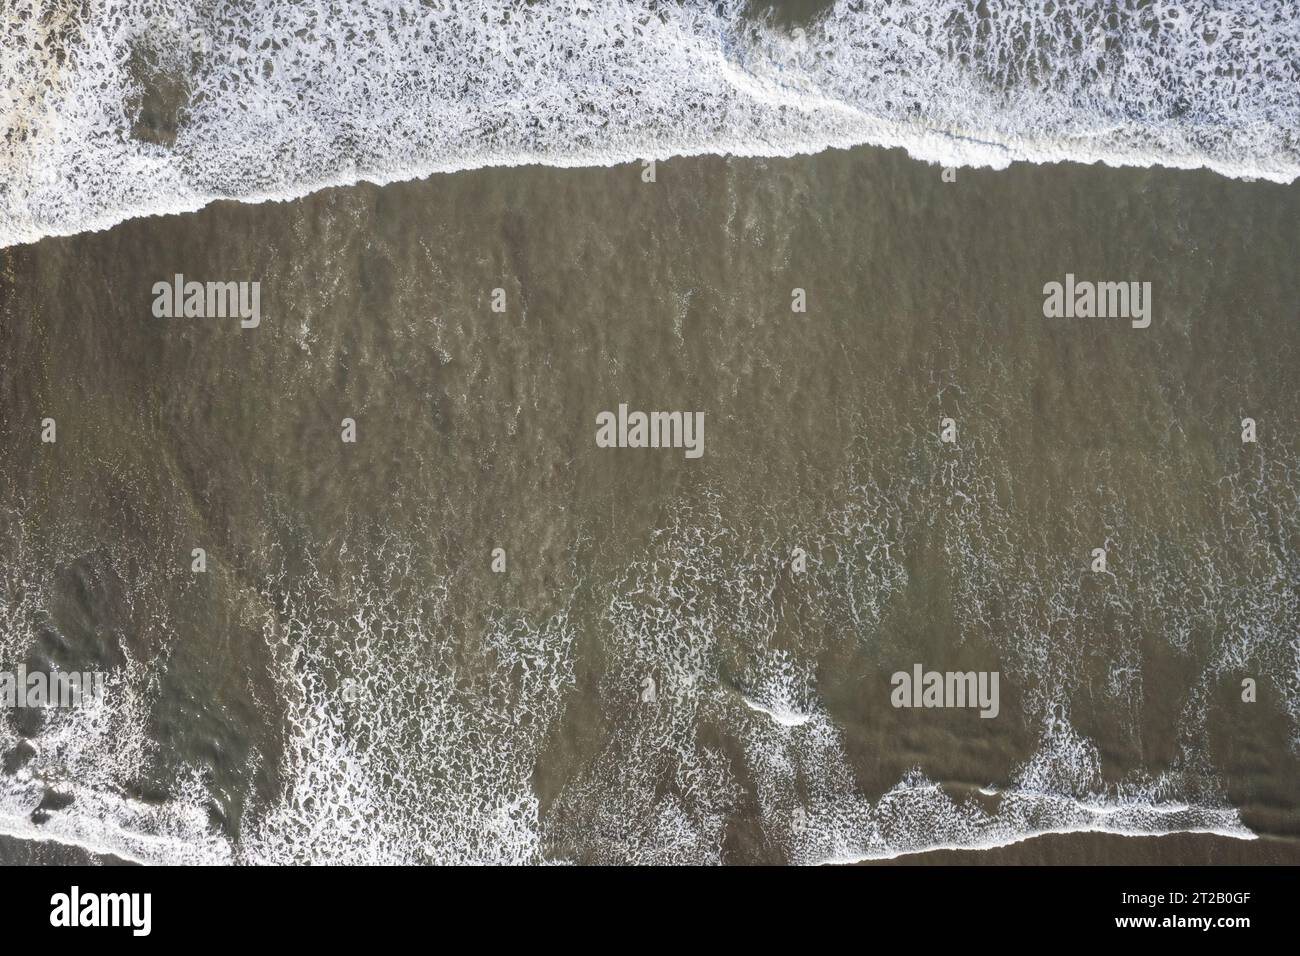 Crashing waves on shore above top drone view texture Stock Photo